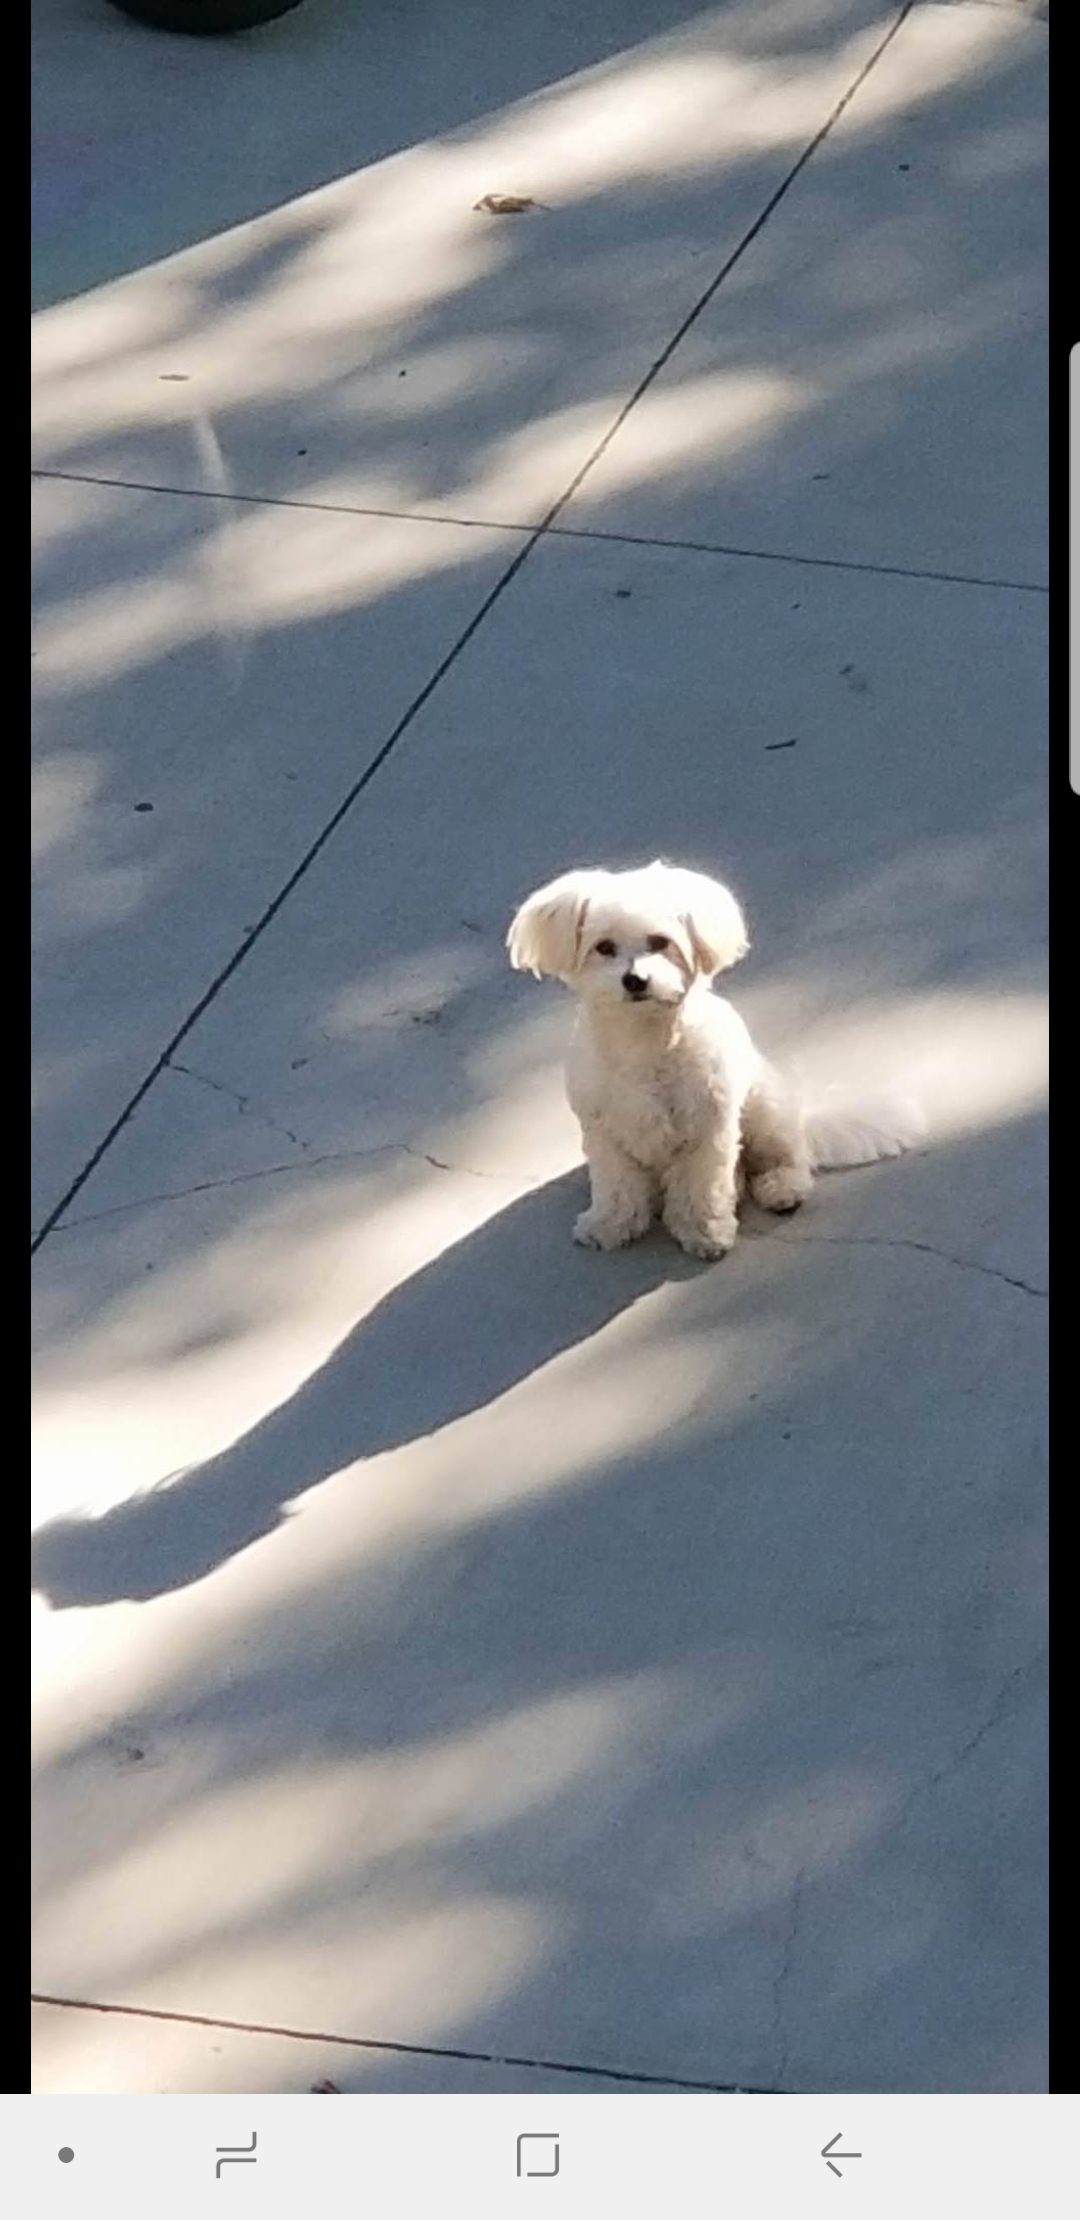 Image of Oso, Lost Dog